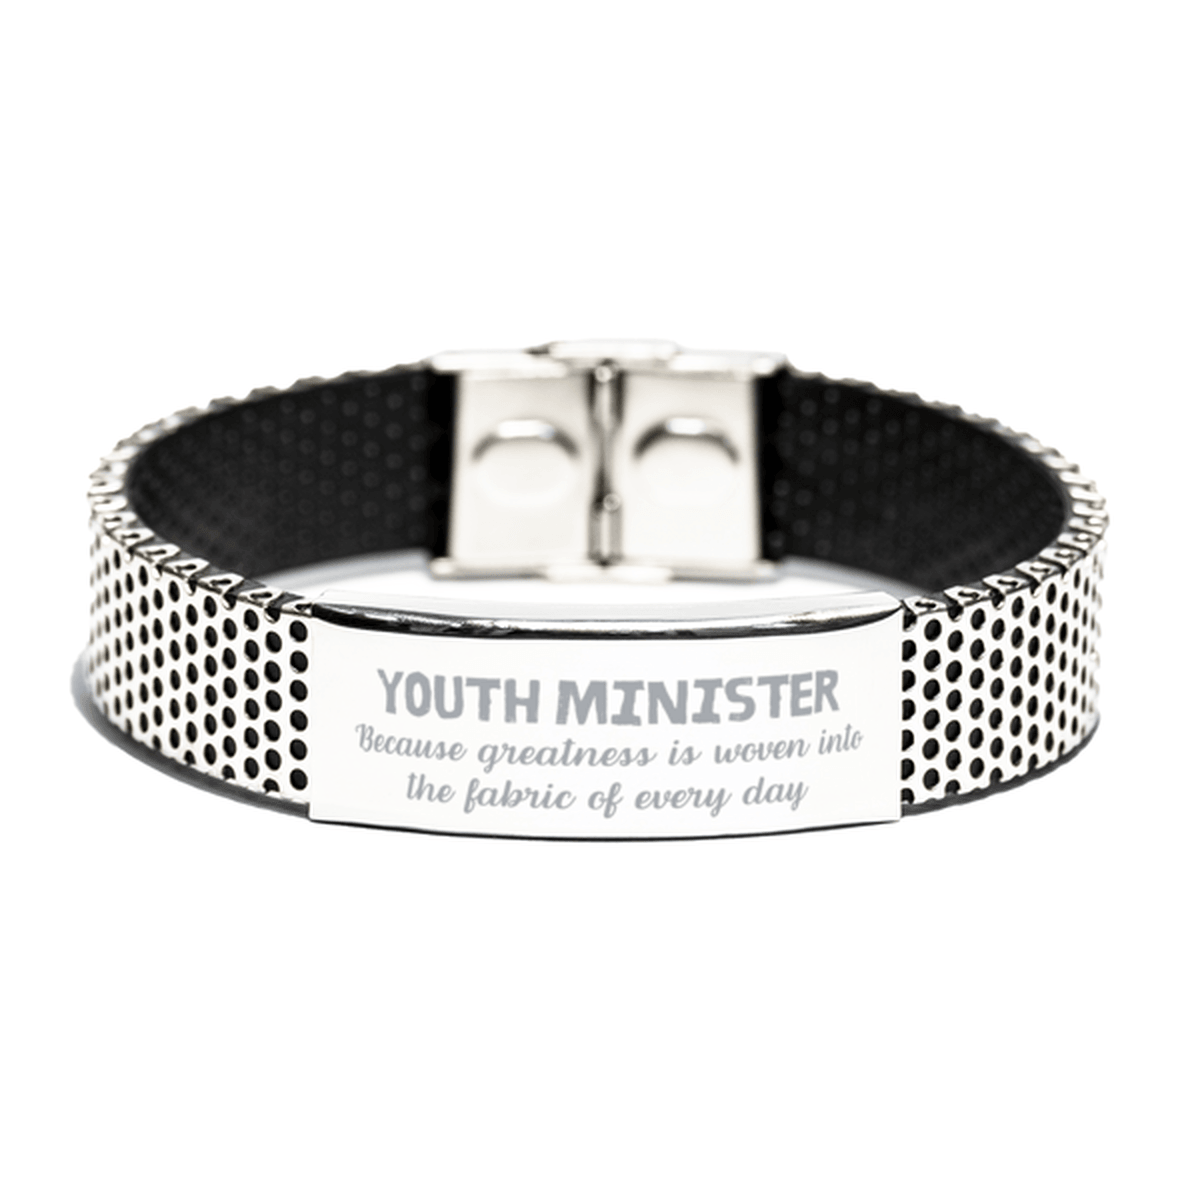 Sarcastic Youth Minister Stainless Steel Bracelet Gifts, Christmas Holiday Gifts for Youth Minister Birthday, Youth Minister: Because greatness is woven into the fabric of every day, Coworkers, Friends - Mallard Moon Gift Shop